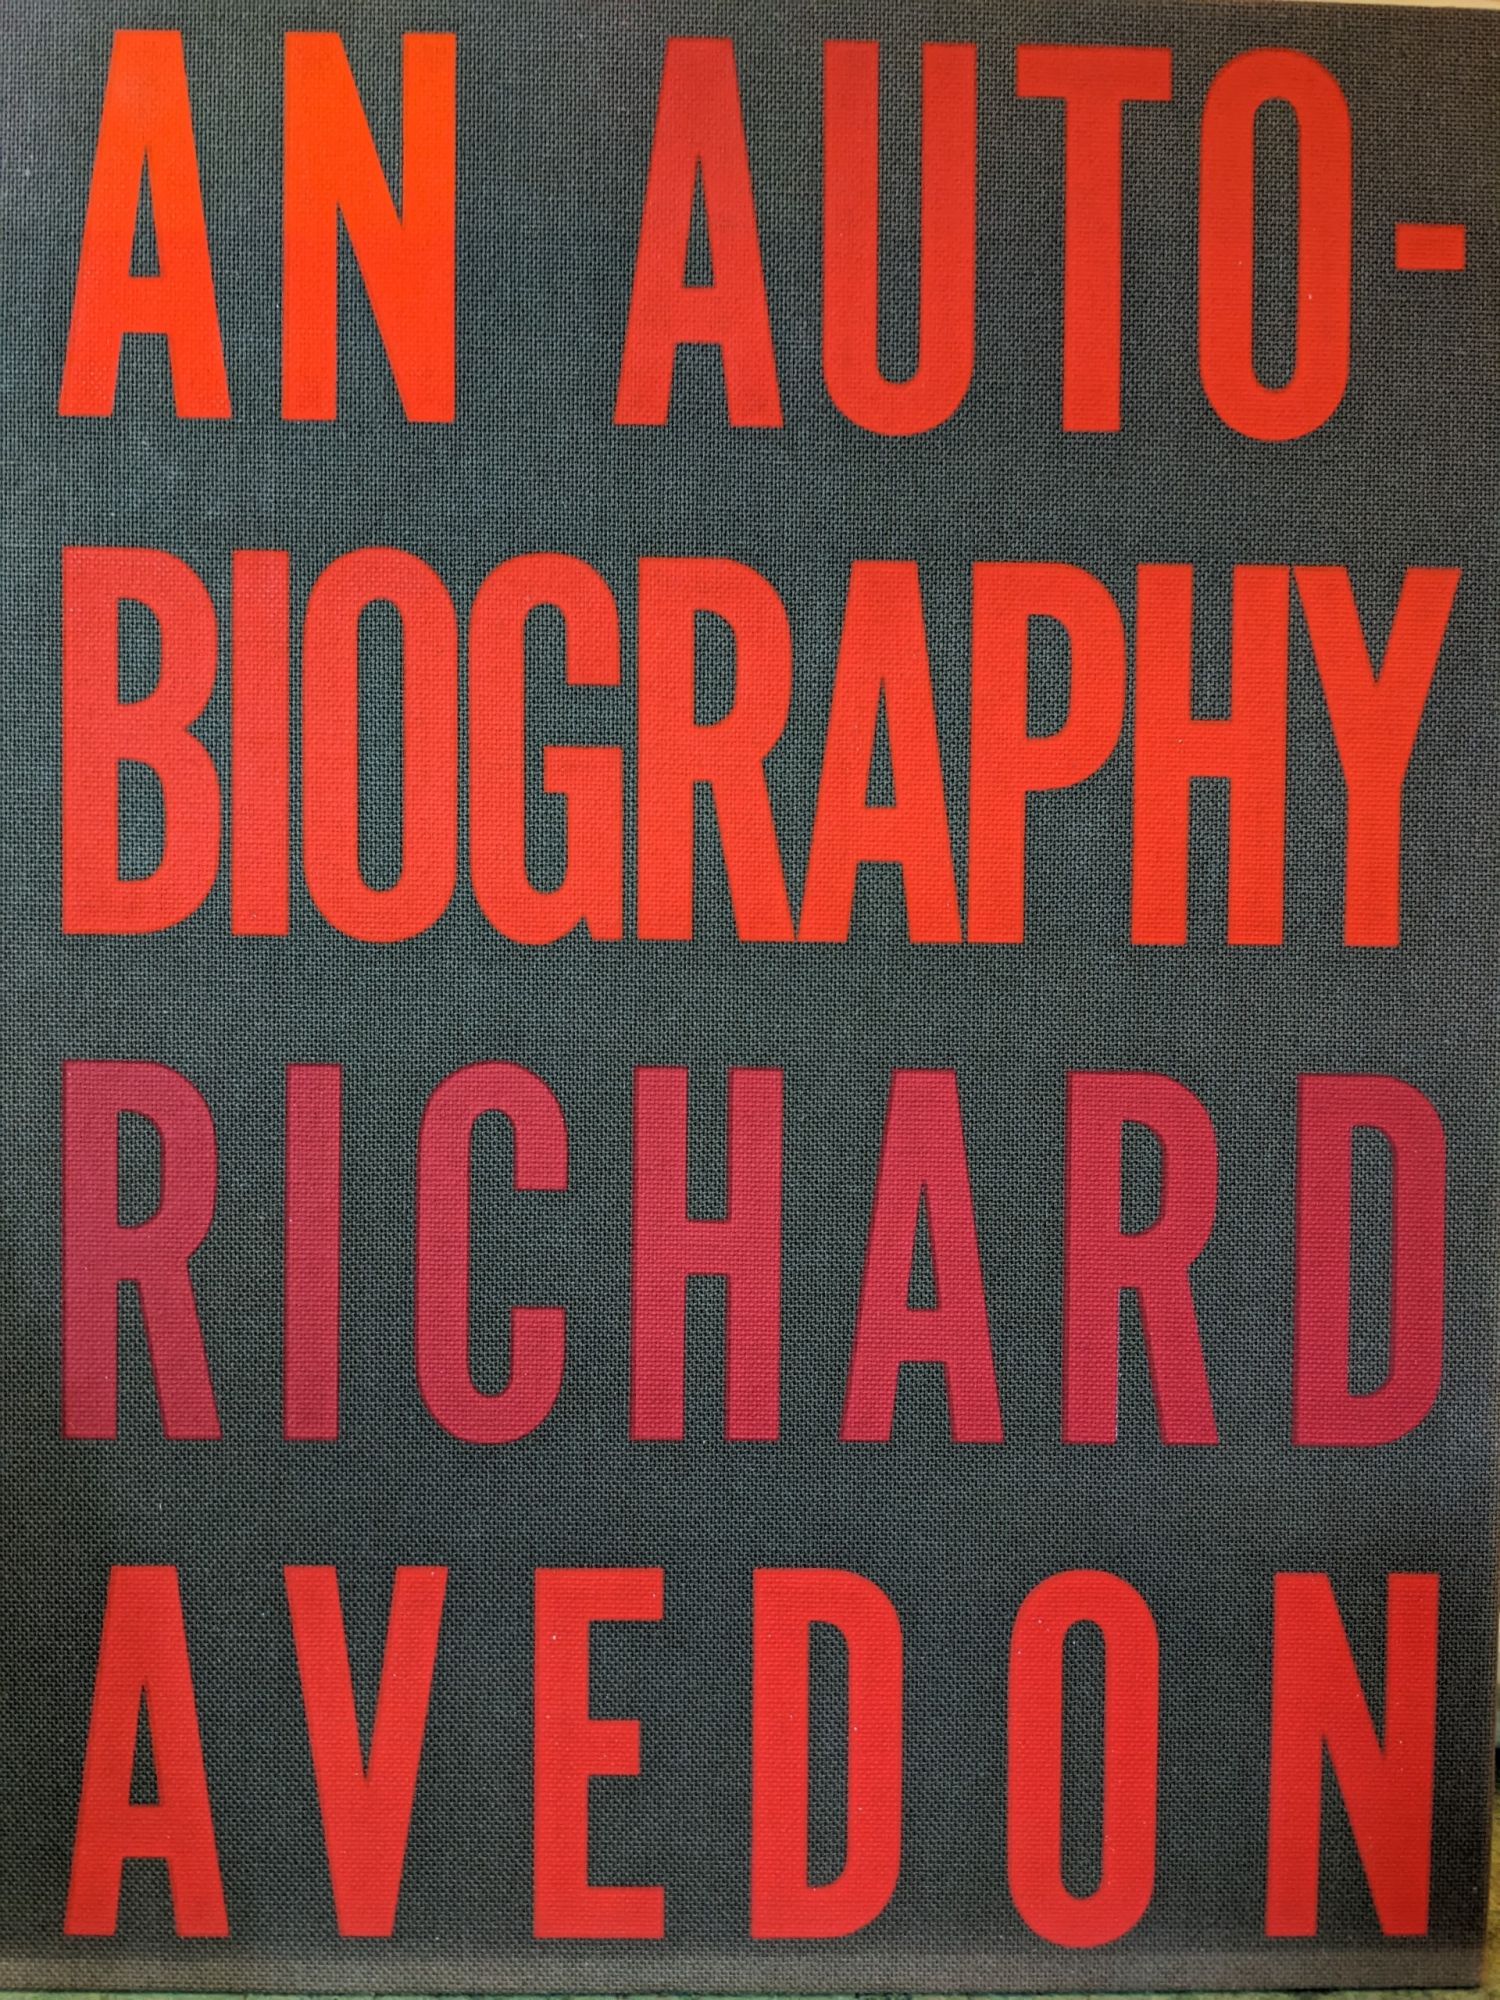 An Autobiography by RICHARD AVEDON on A Cappella Books